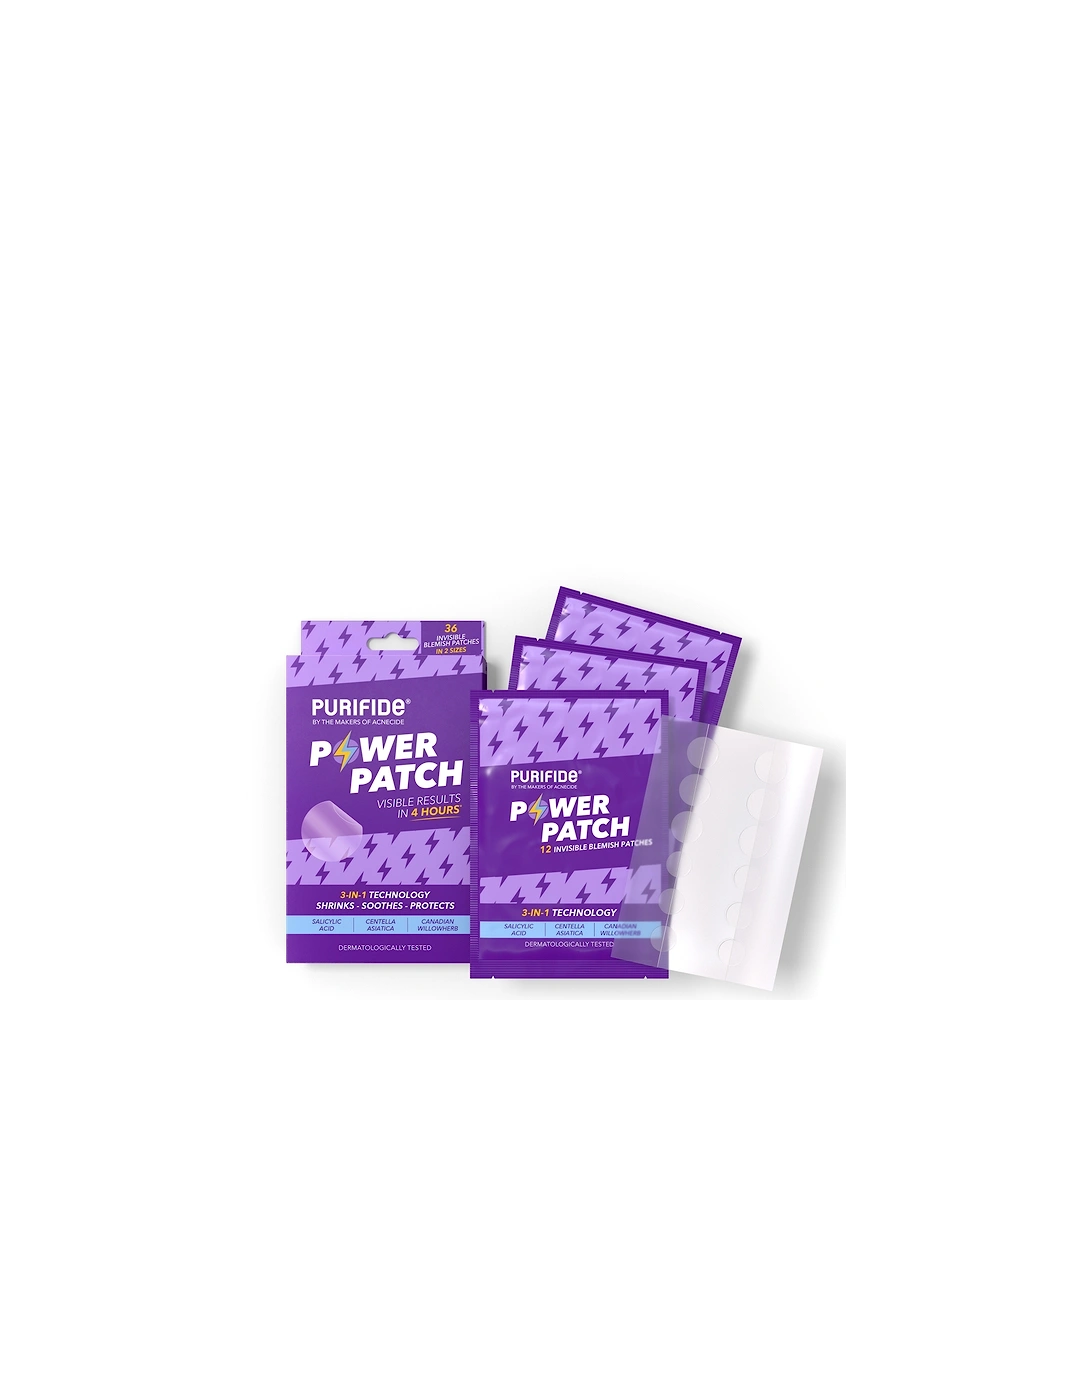 PURIFIDE by 3-in-1 Power Patch Salicylic Acid Spot Patches for Blemish-Prone Skin 36 Spot Stickers, 2 of 1